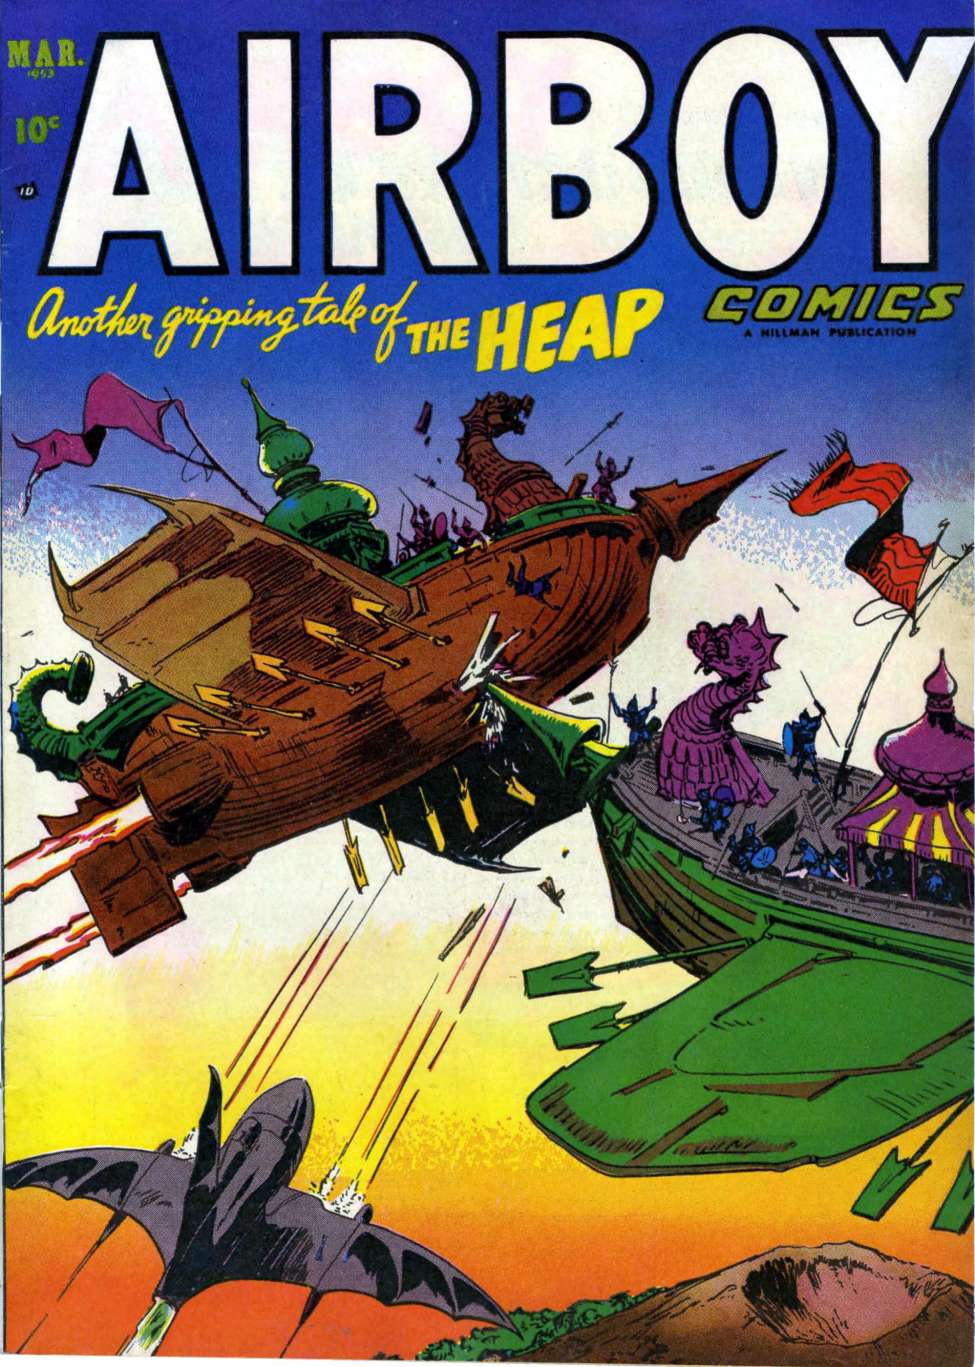 Book Cover For Airboy Comics v10 2